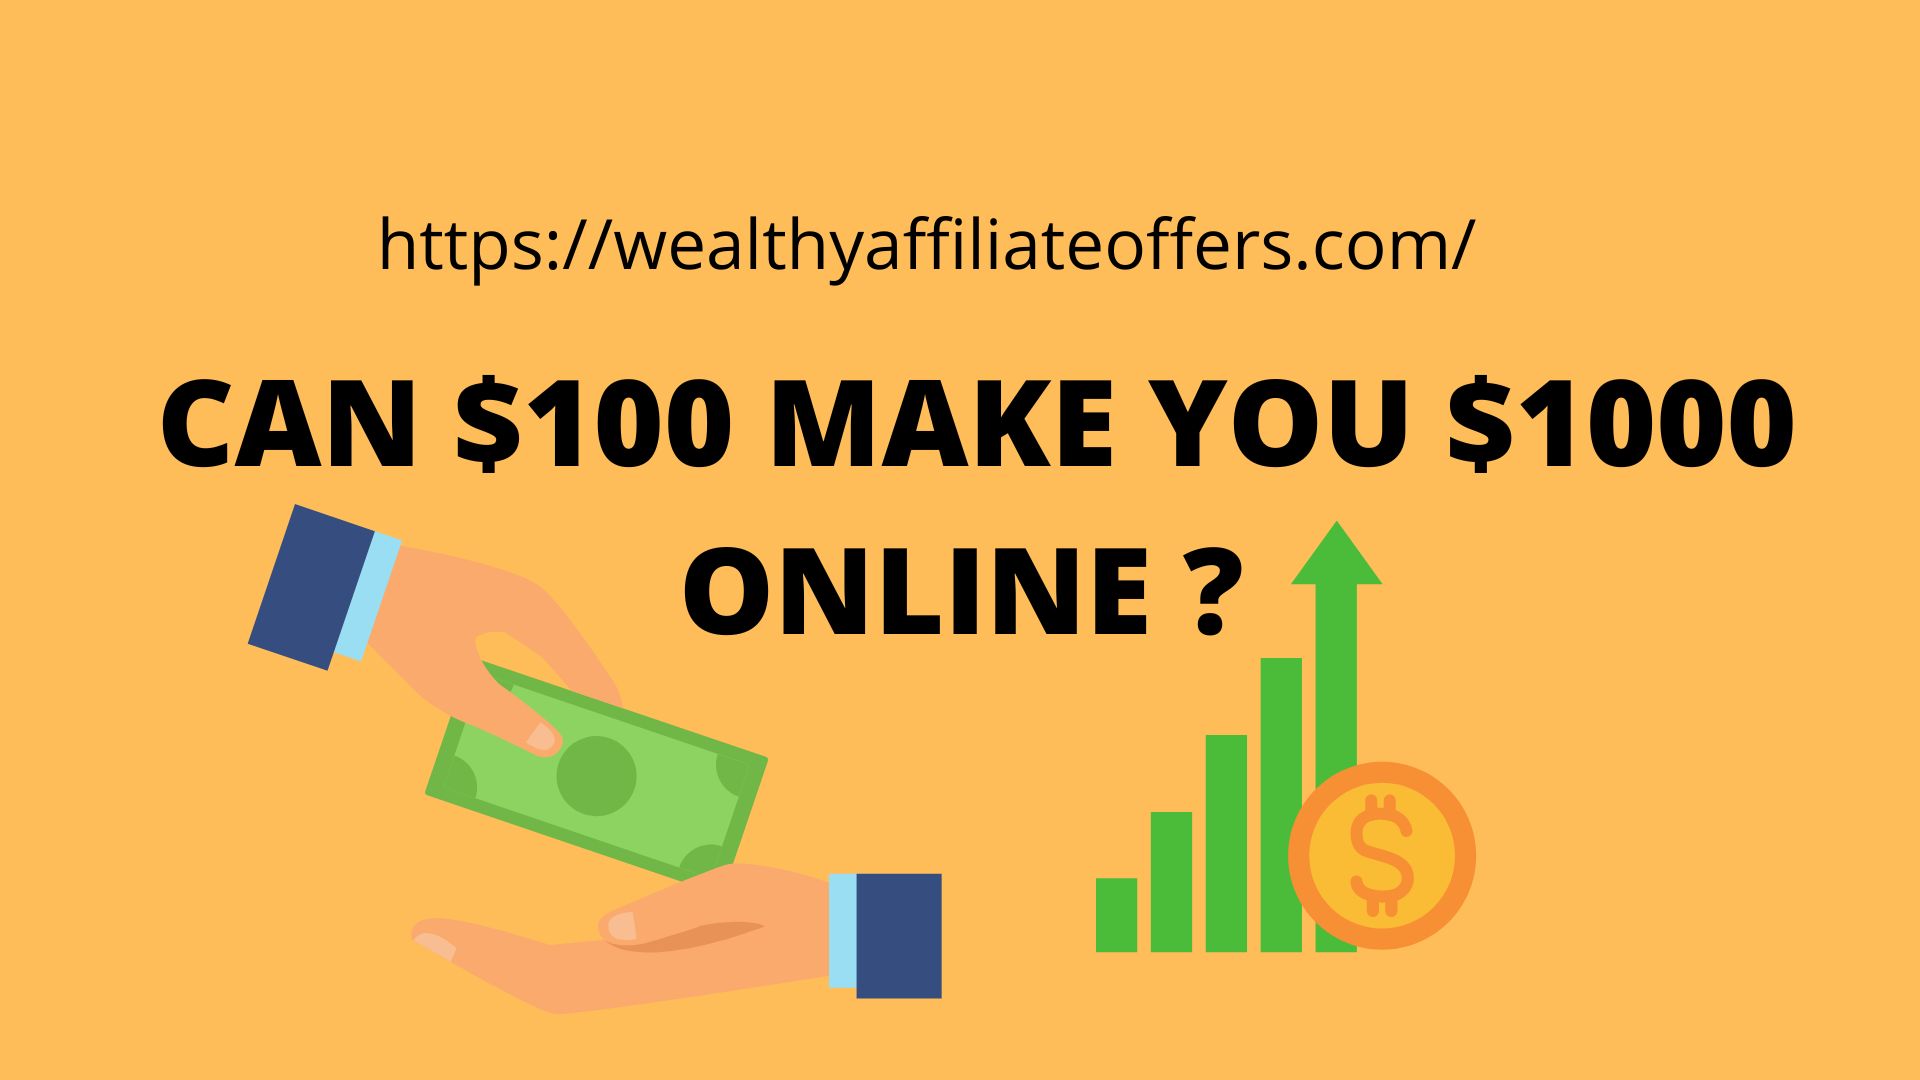 CAN $100 MAKE YOU $1000 ONLINE?